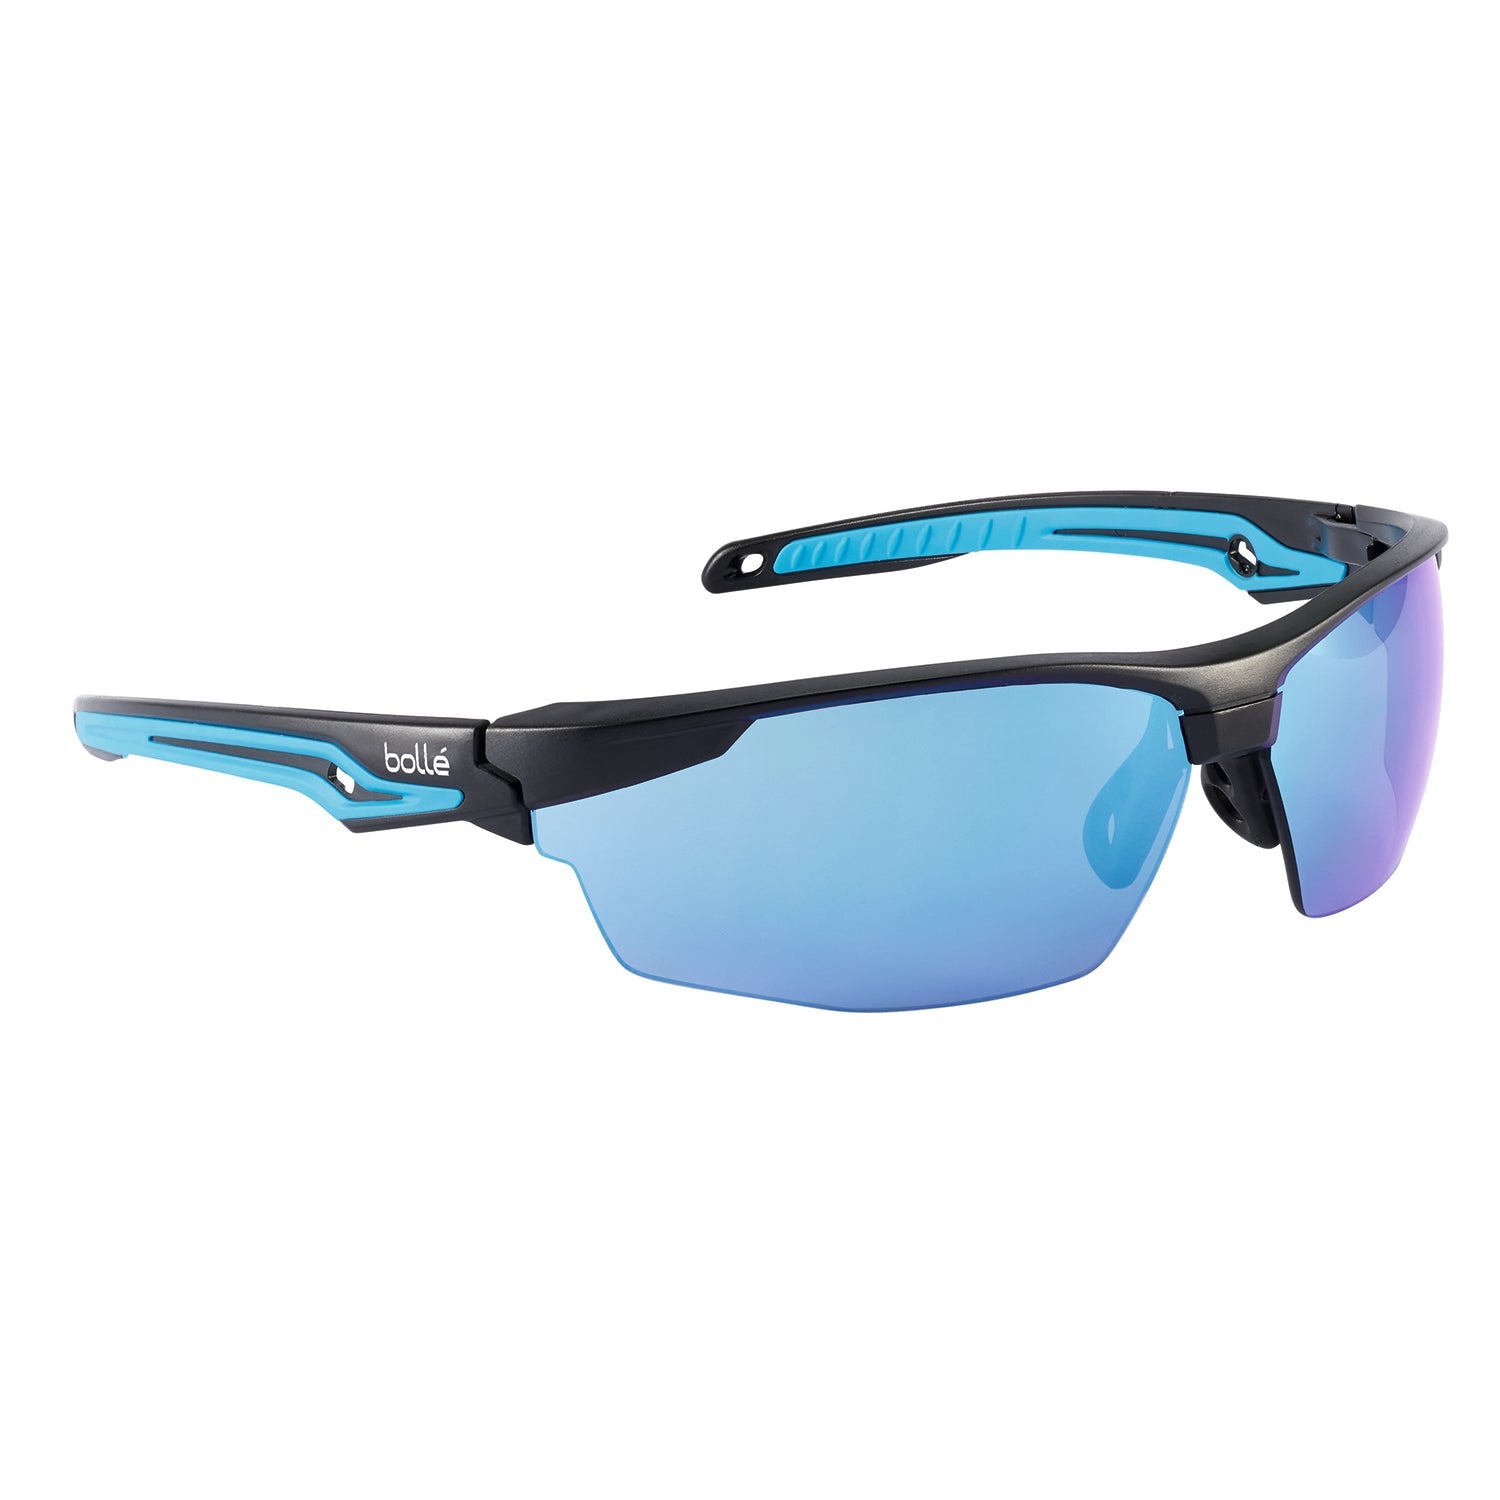 Bolle TRYON TRYOFLASH Safety Glasses, Blue Flash Lens